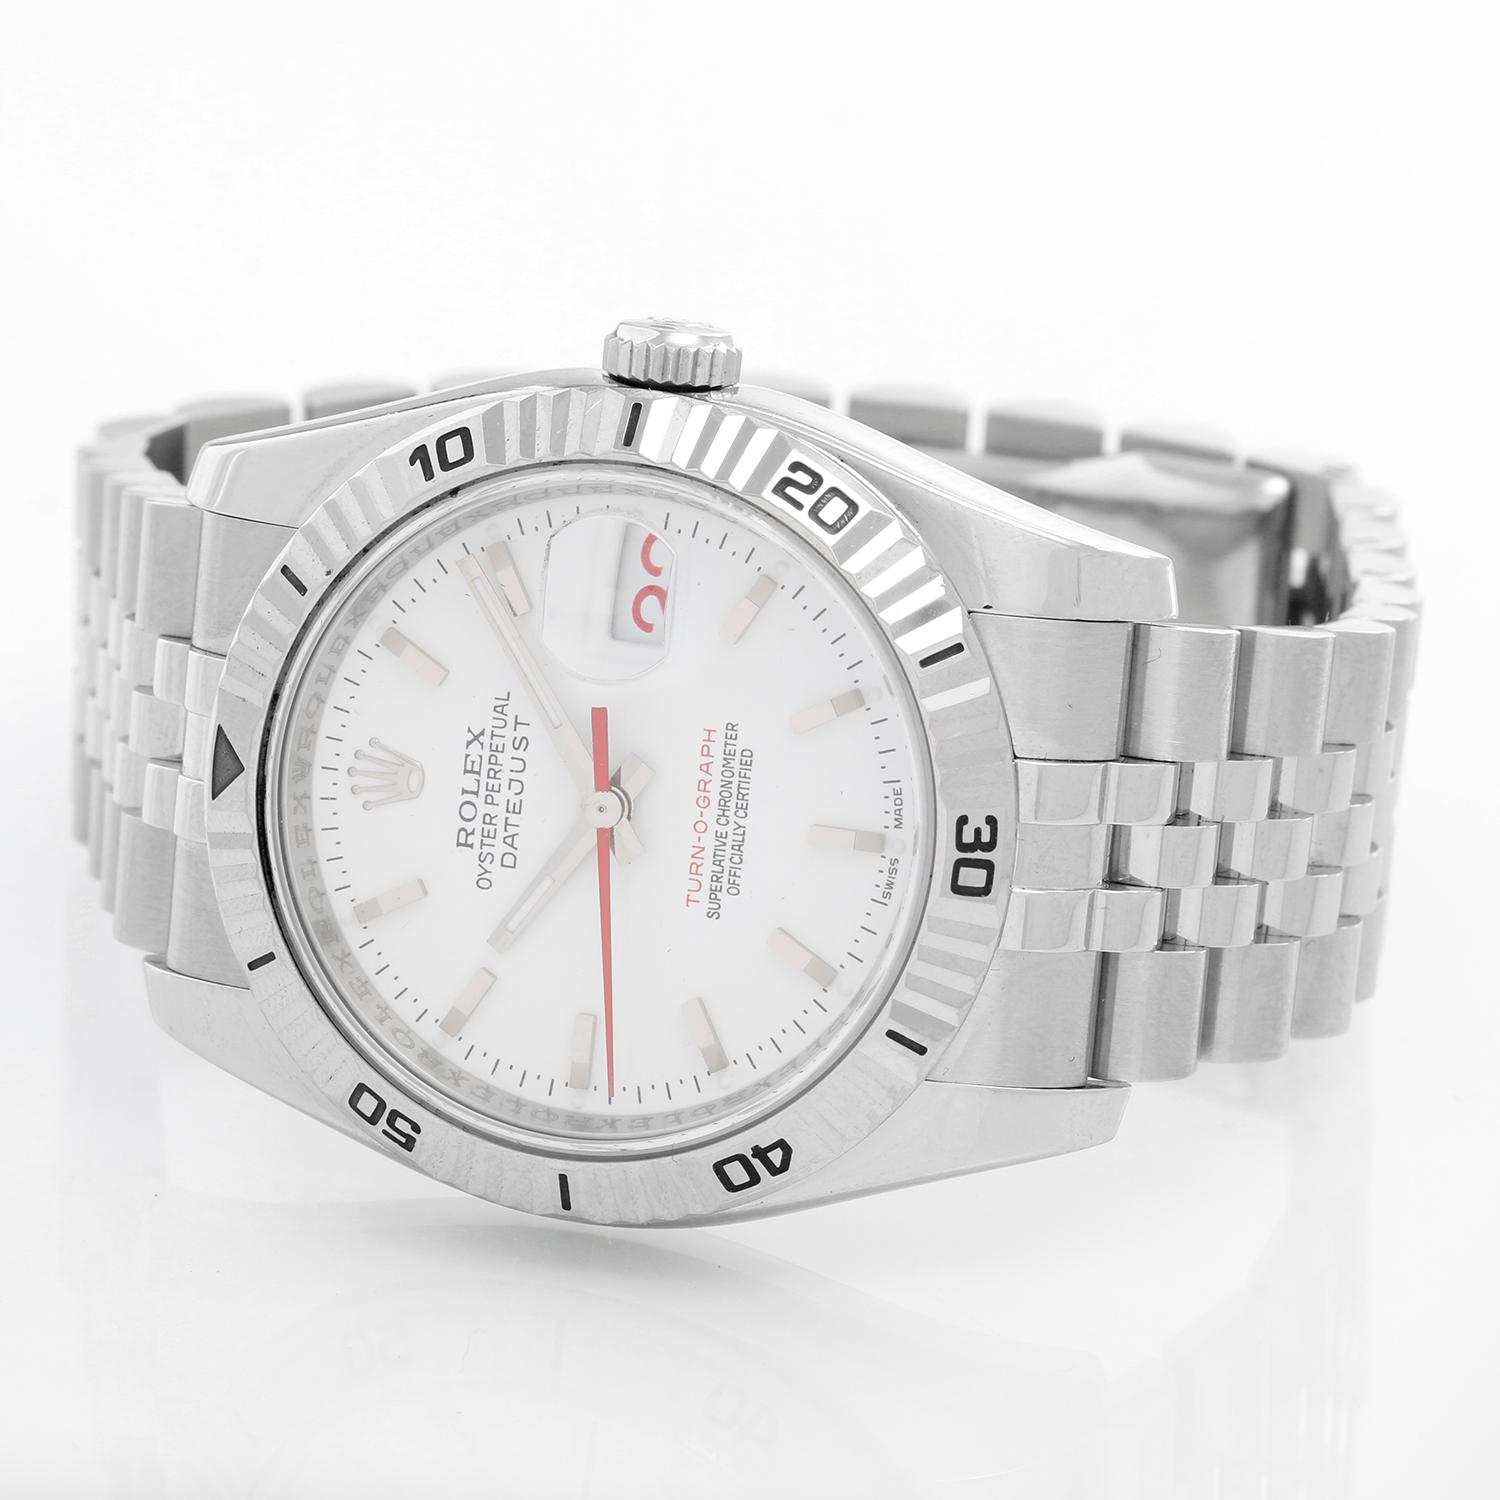 Men's Rolex Turnograph Datejust Stainless Steel Watch 116264 - Automatic winding, 31 jewel, sapphire crystal. Stainless steel case with 18k white gold Thunderbird bezel  (36mm diameter). White dial with stick markers; red date and second hand.